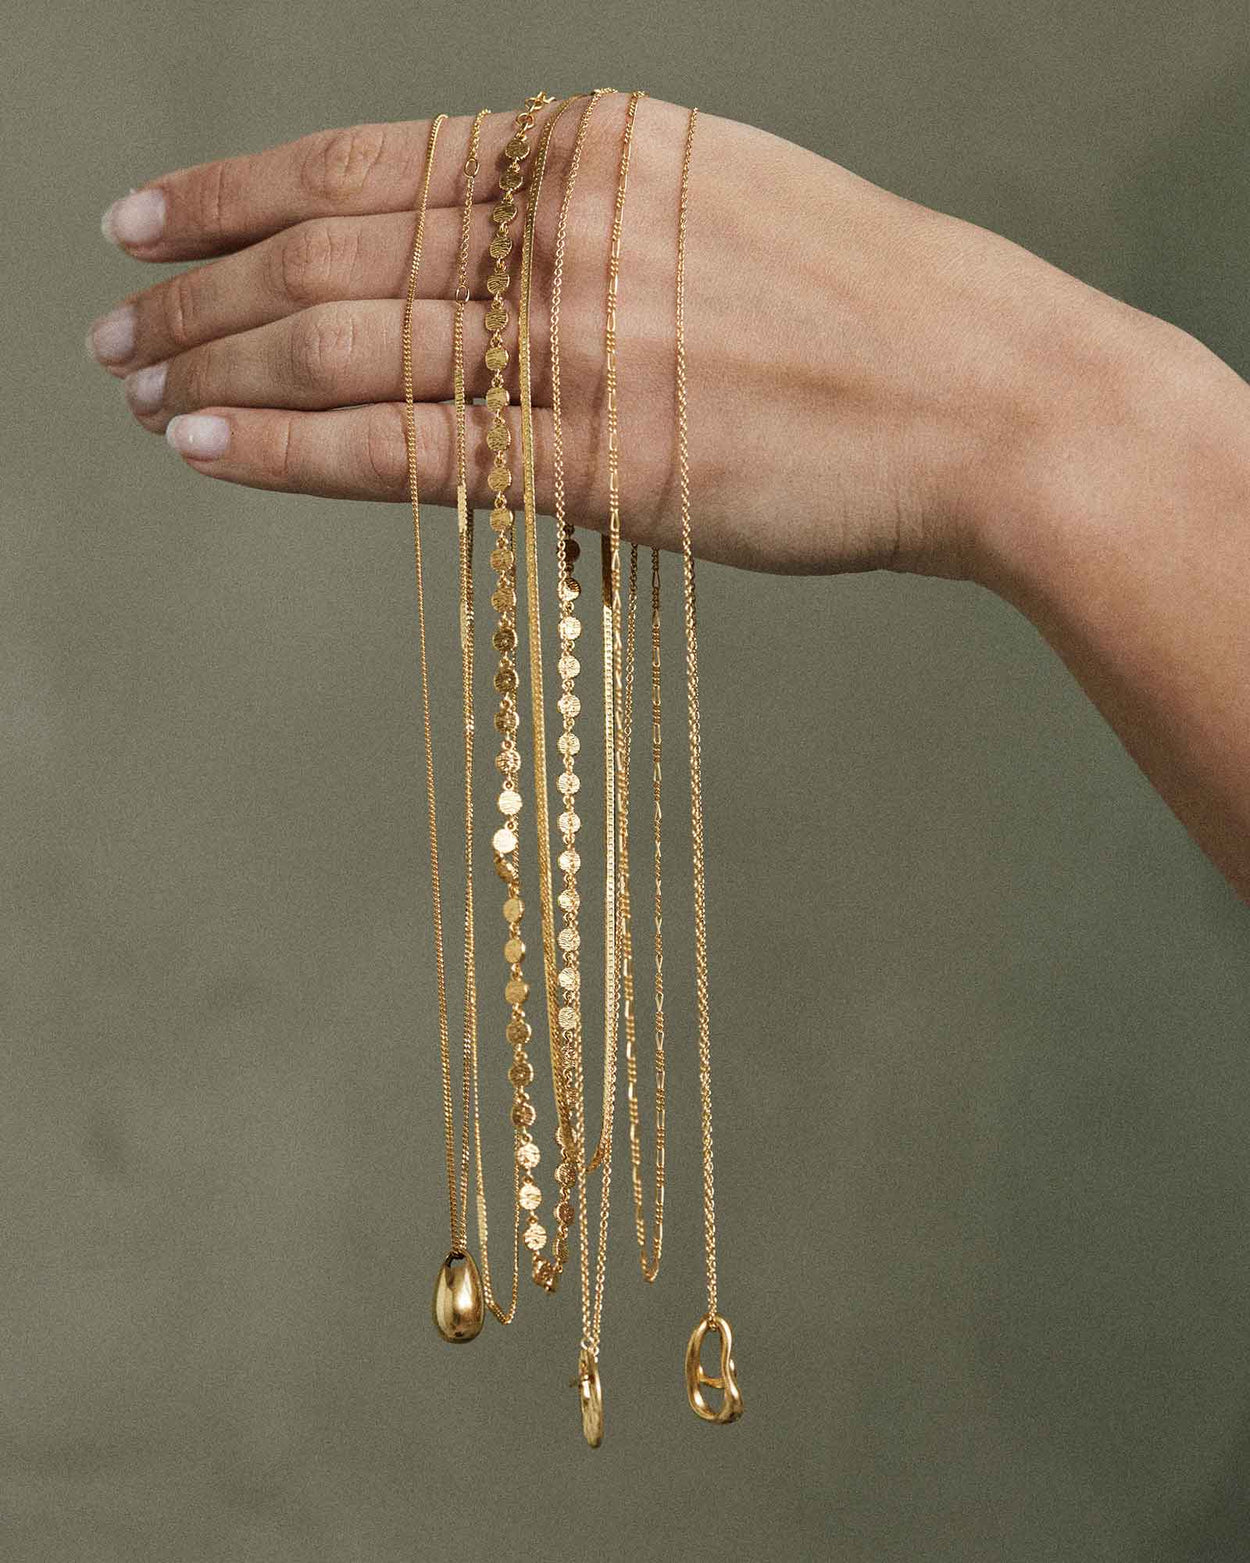 TRESOR CHAIN NECKLACE (18K GOLD PLATED) – KIRSTIN ASH (United States)